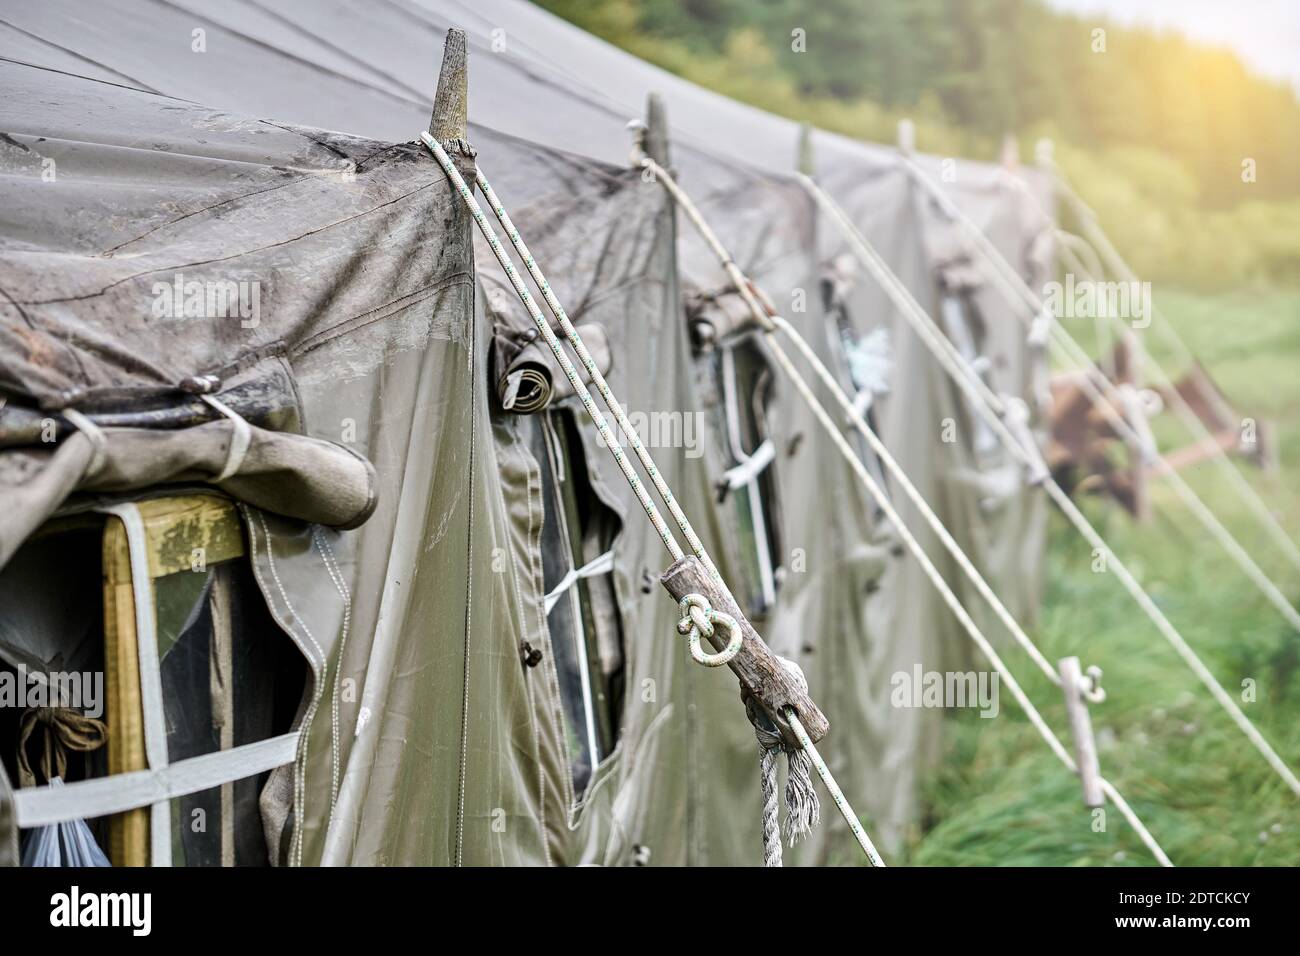 Big military field tent with windows and a stove on the lawn in the forest. Tent window close-up Stock Photo